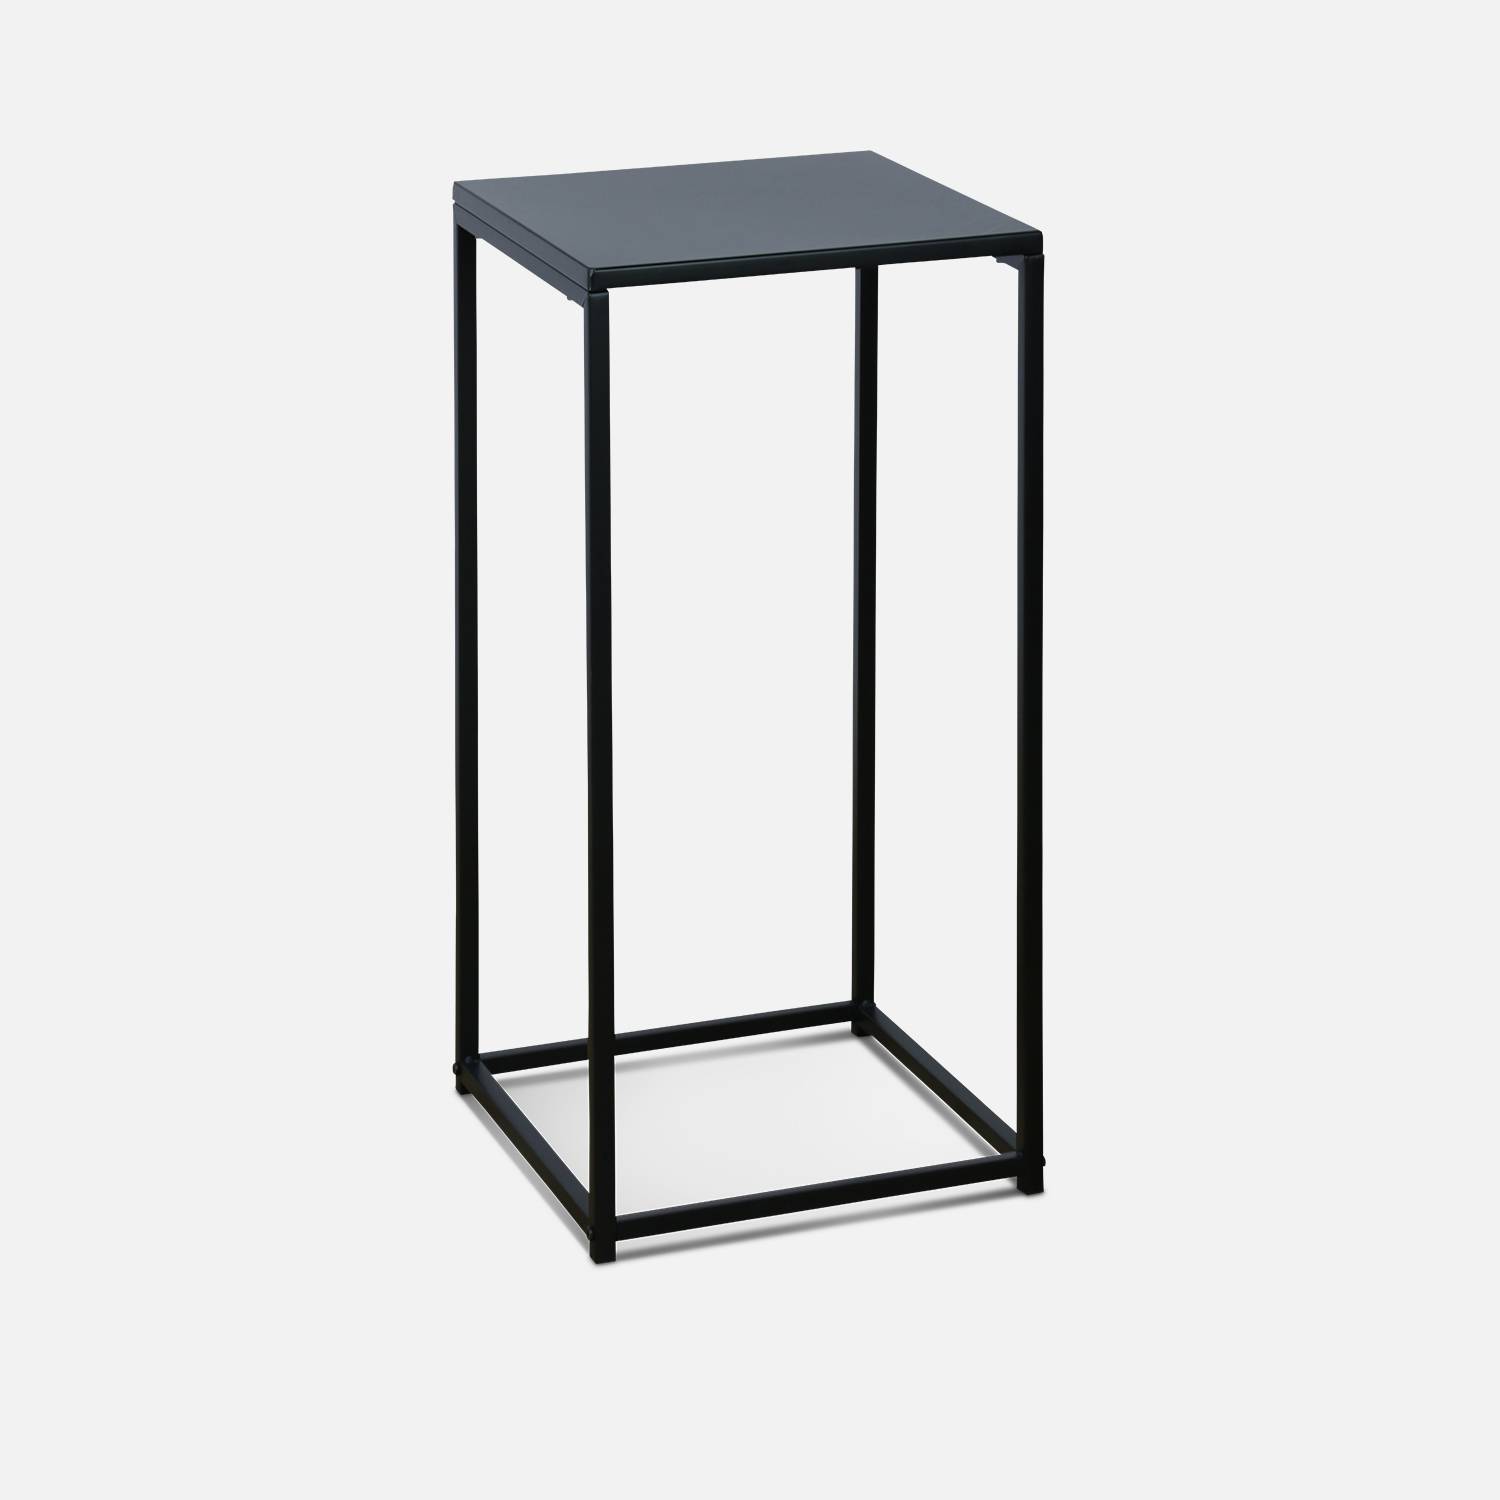 Set of 2 side tables/ end of sofa , Industrielle, Black Photo4